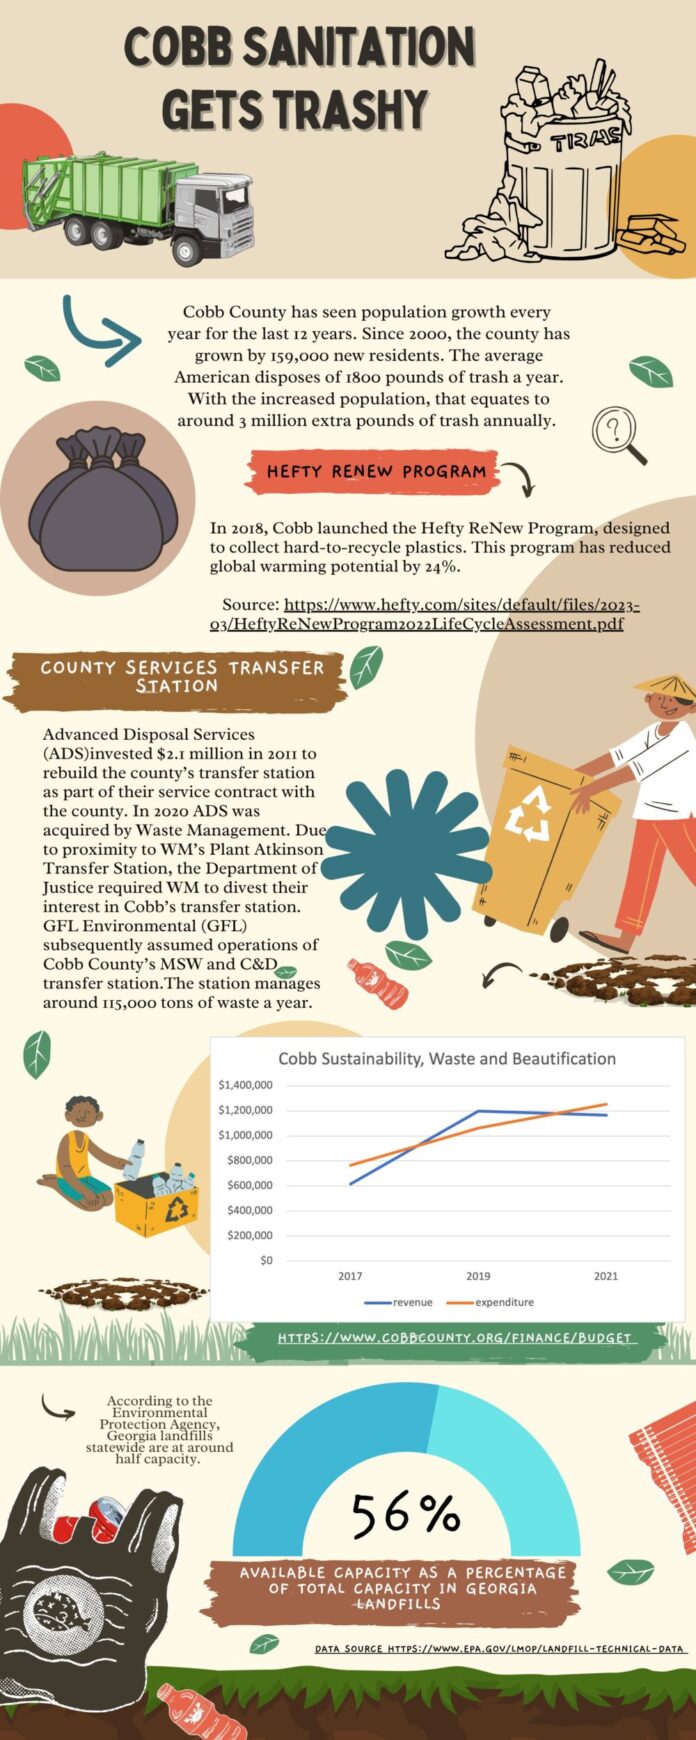 A tan graphic with colorful charts and graphics depicts data about Cobb County's waste levels and strategies regarding how to limit said waste.